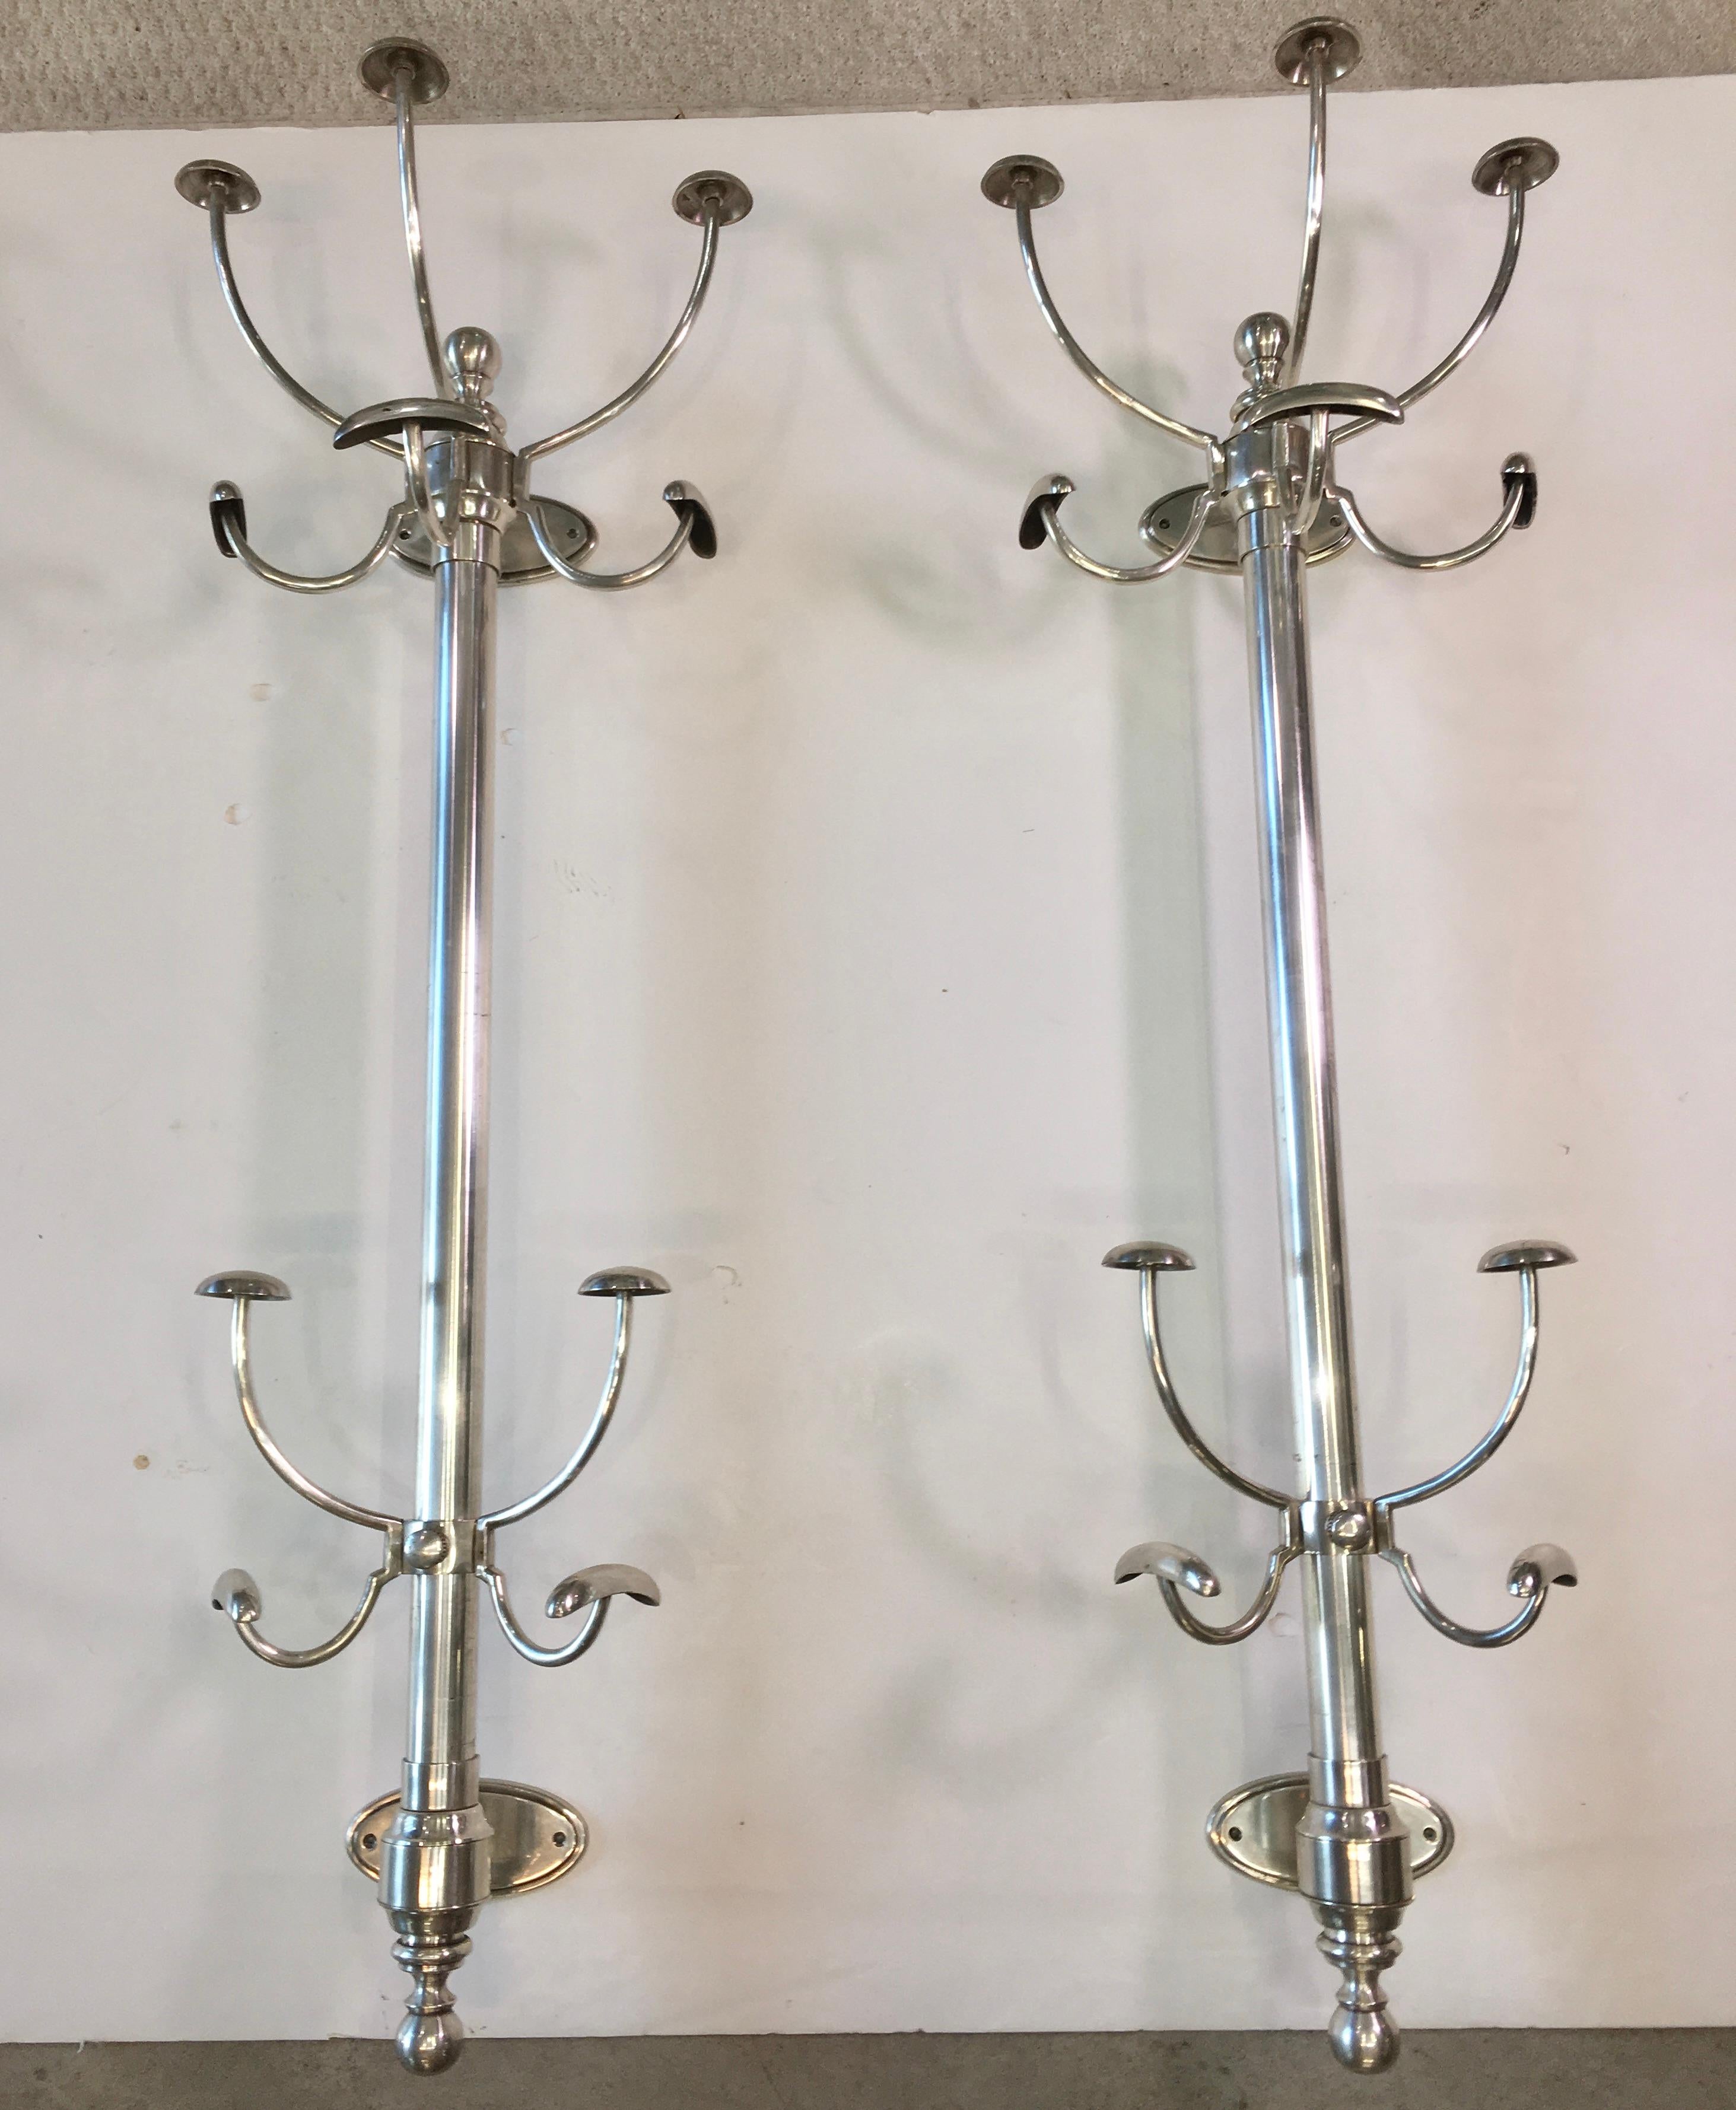 Pair of Vintage Nickeled Brass Wall Mounted Coat & Hat Trees 3